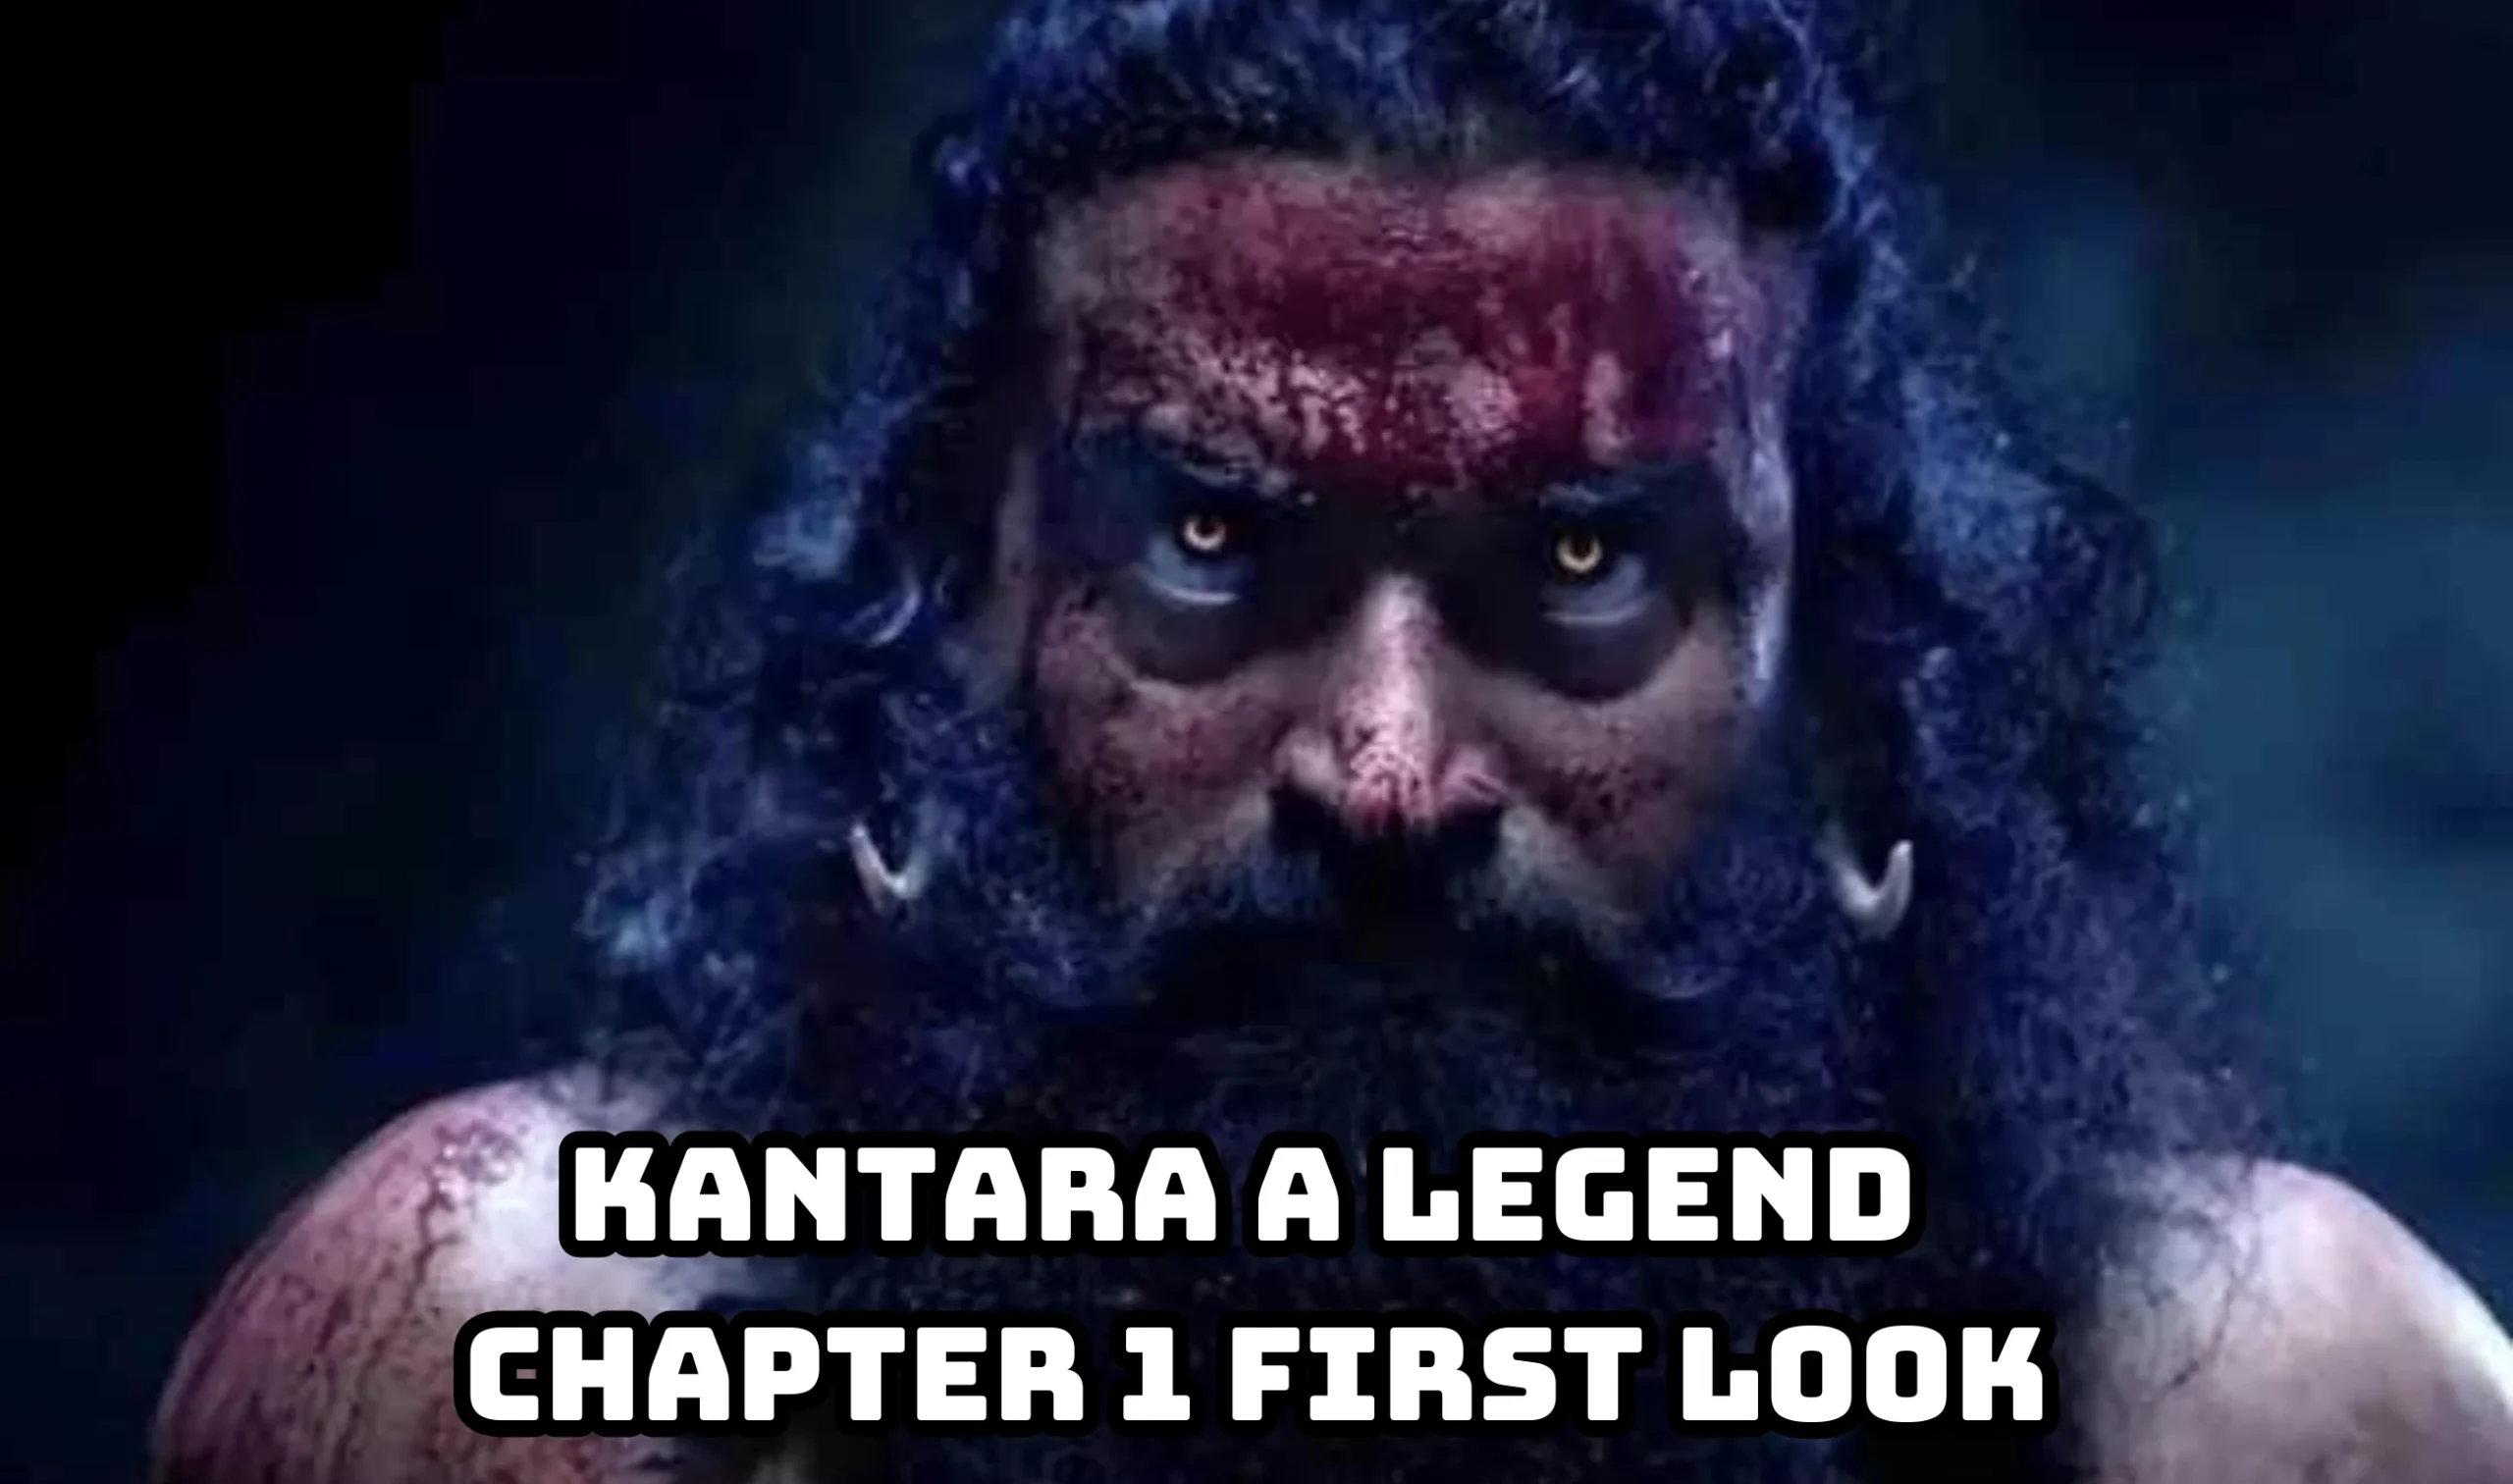 Kantara A Legend Chapter 1 First Look Terser Review: It’s Sequel or Prequel